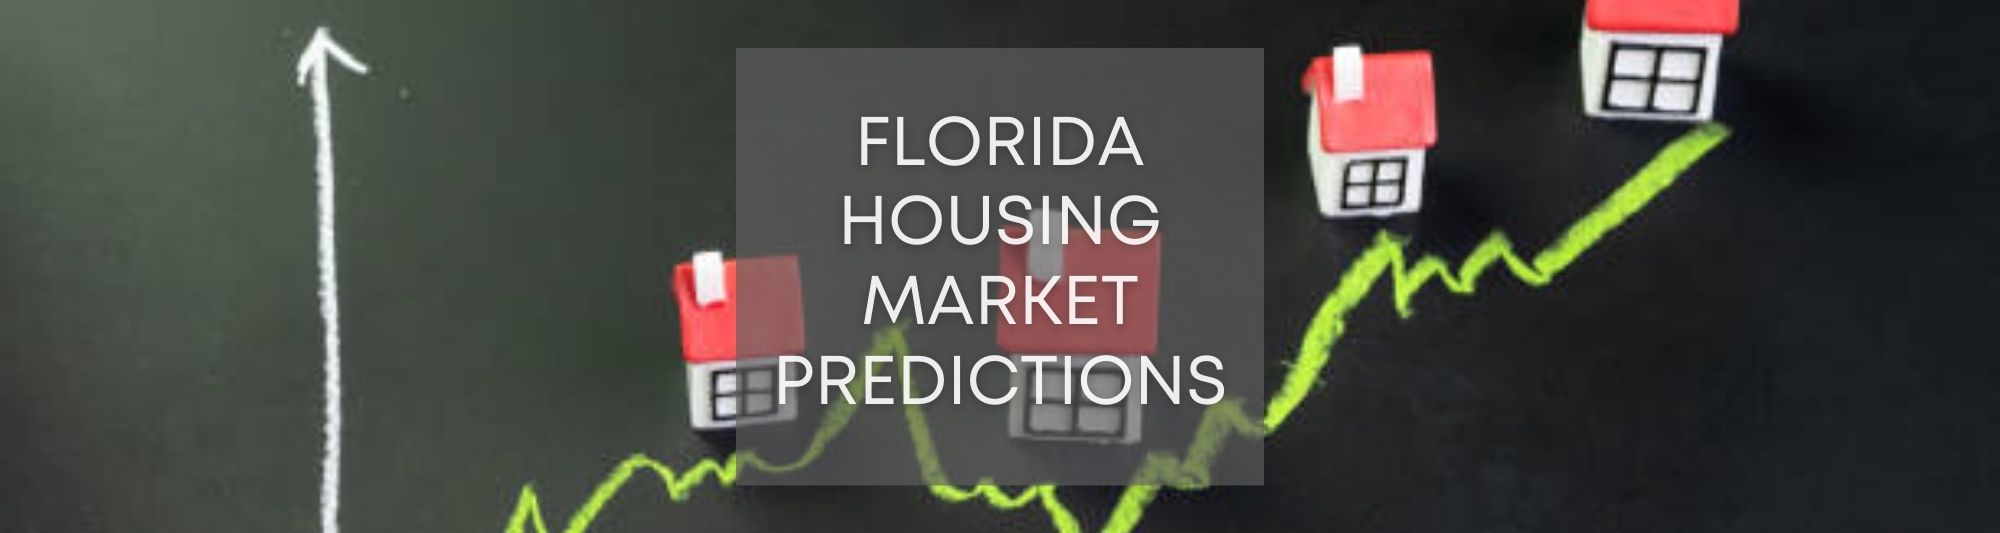 Photo of a graph with houses projecting market predictions